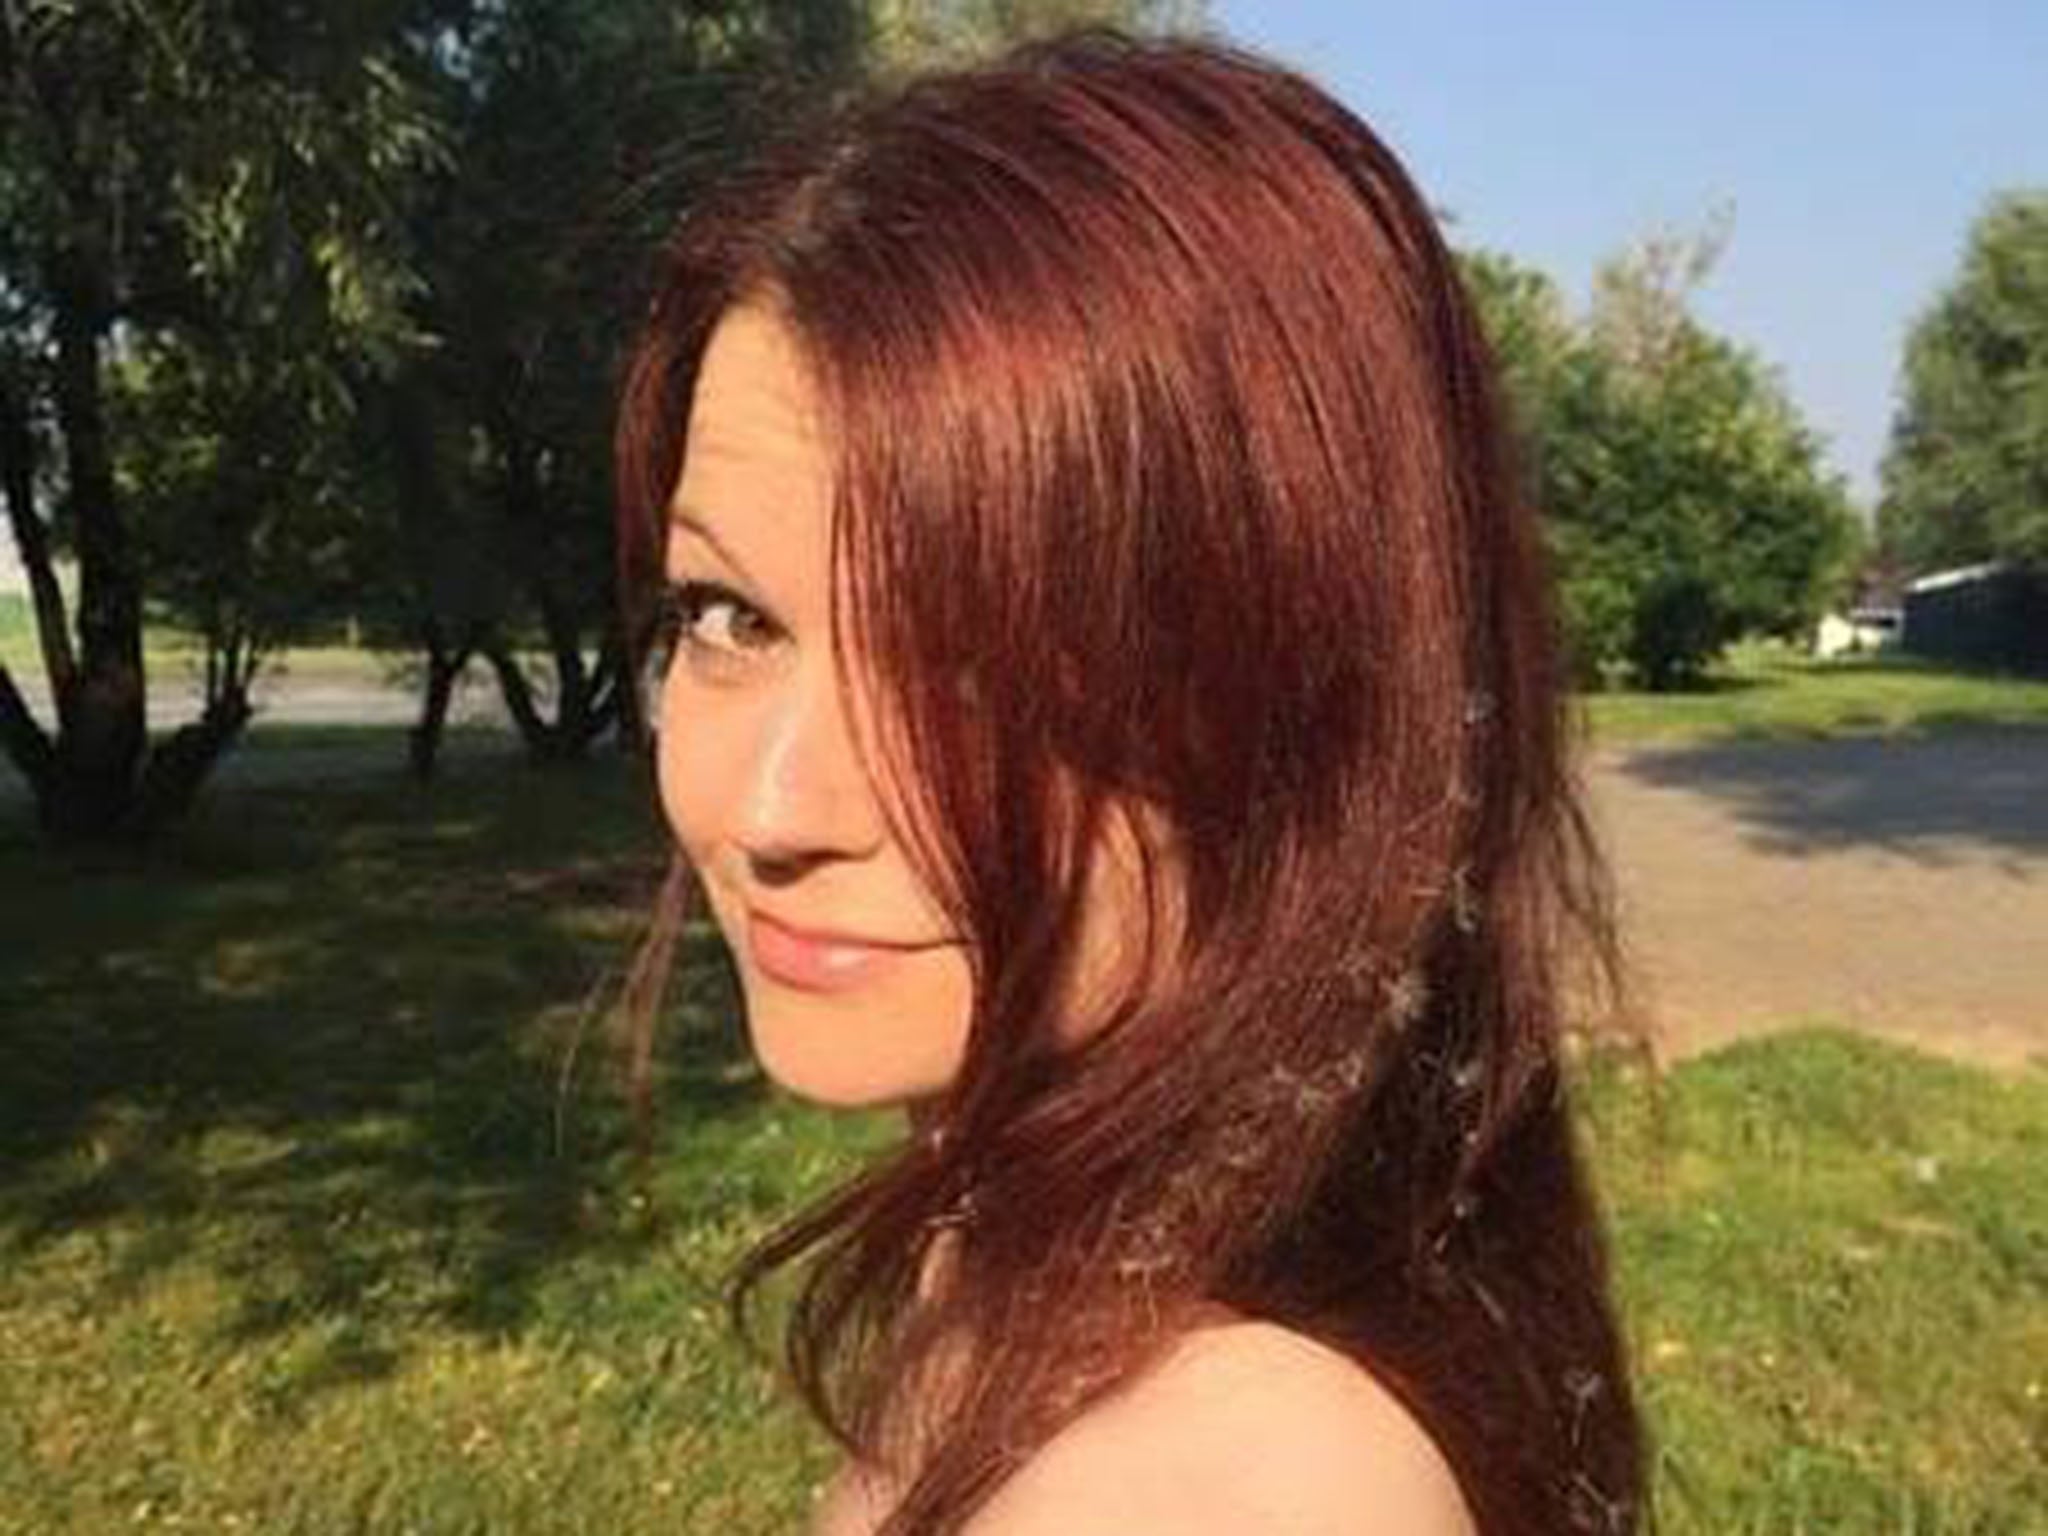 Yulia Skripal, 33, is recovering but her father remains in a critical condition